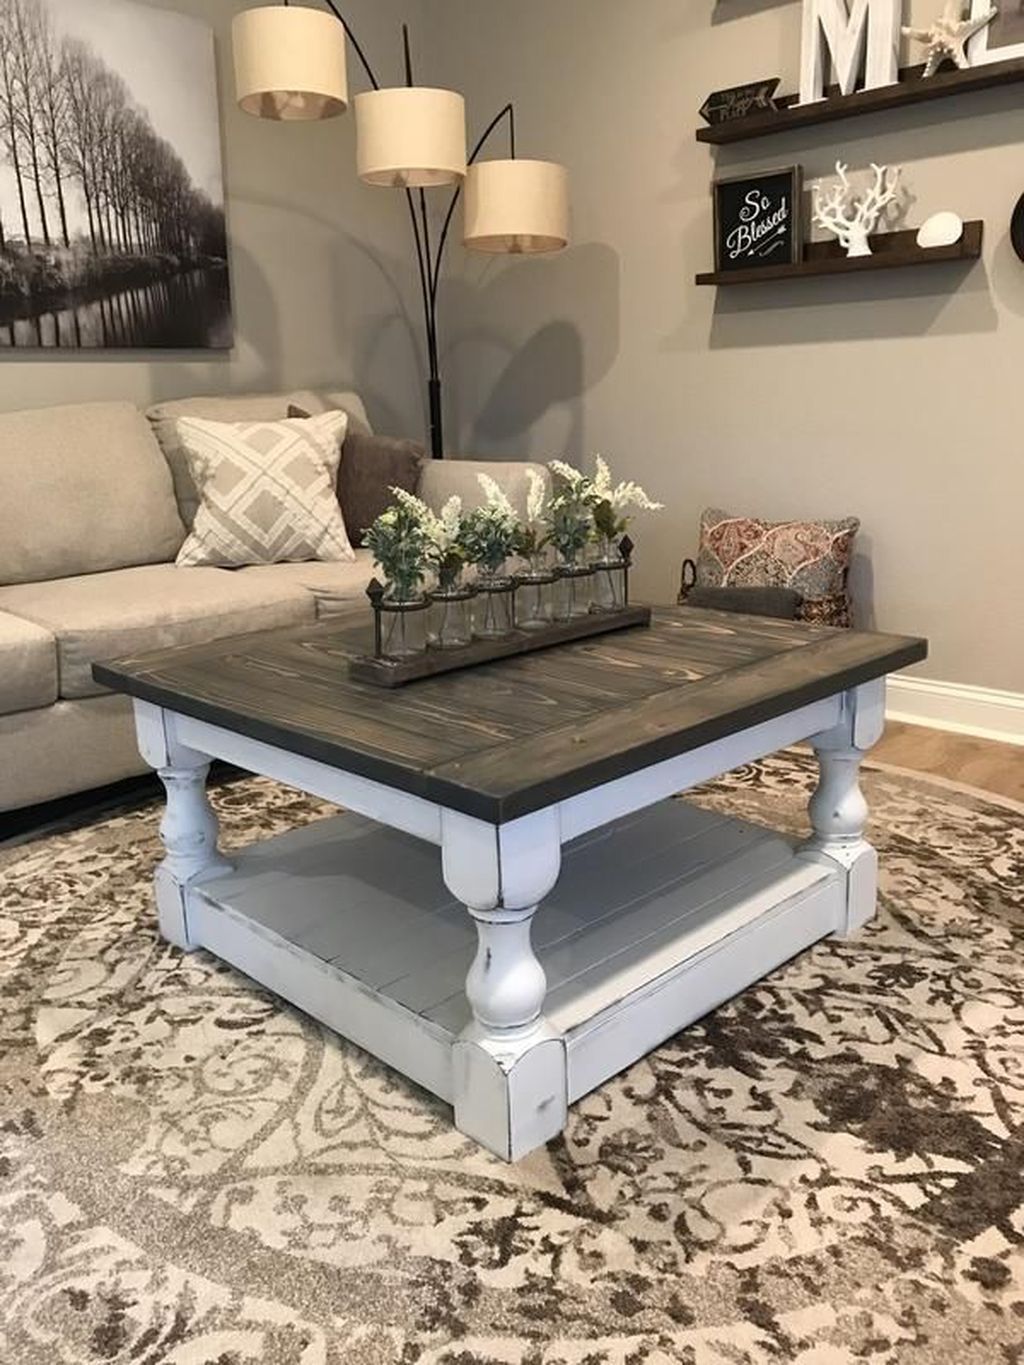 30+ Rustic Farmhouse Table Ideas To Use In The Decor | Farmhouse Style Intended For Living Room Farmhouse Coffee Tables (Gallery 7 of 20)